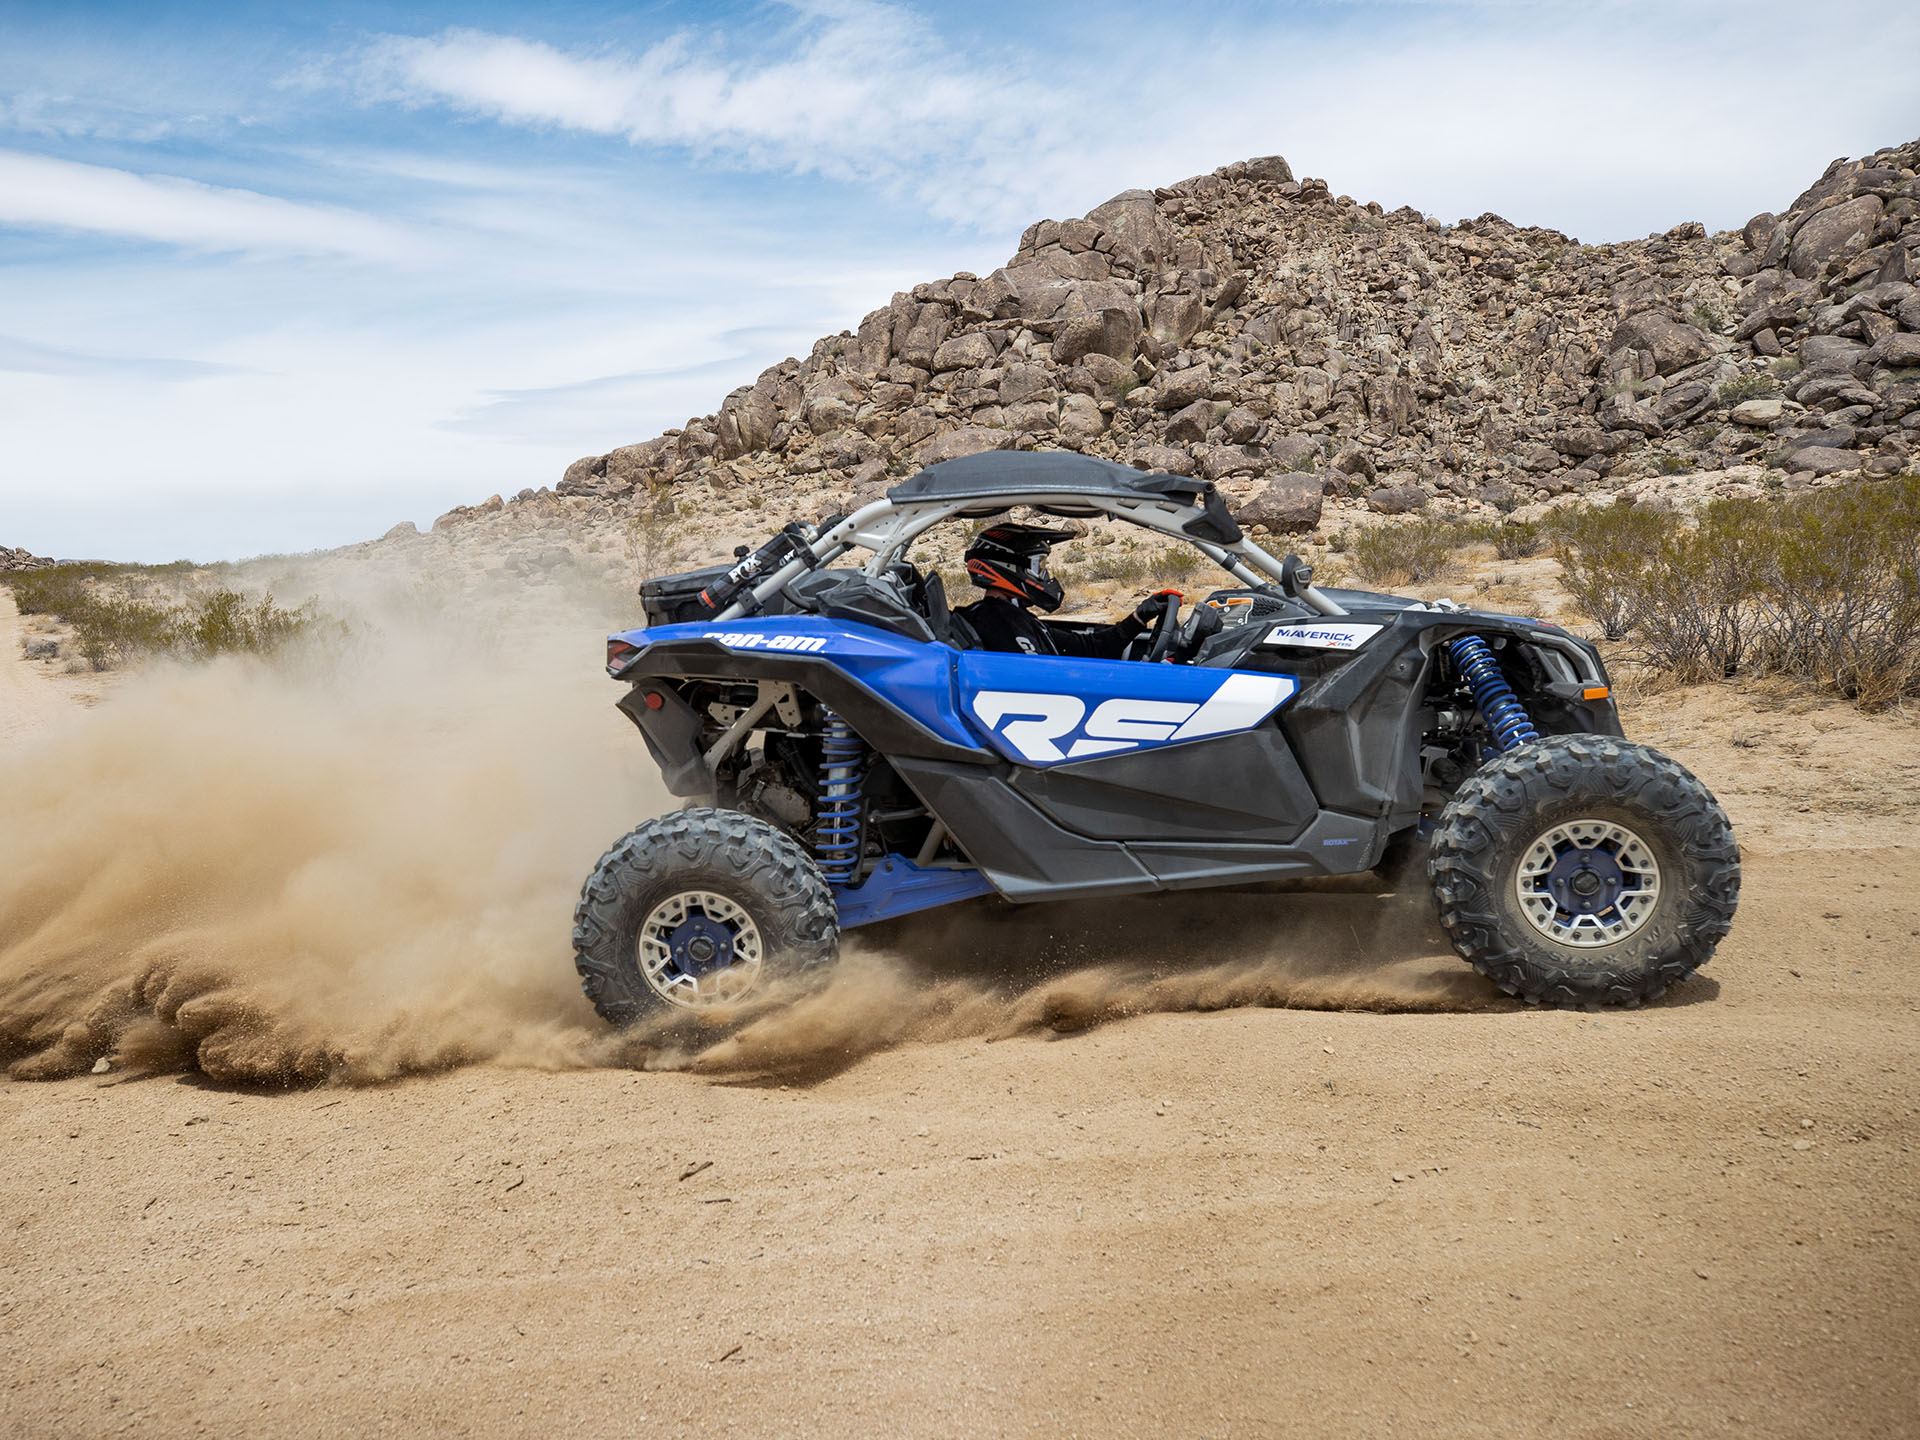 2022 Can-Am Maverick X3 X RS Turbo RR in Paso Robles, California - Photo 5